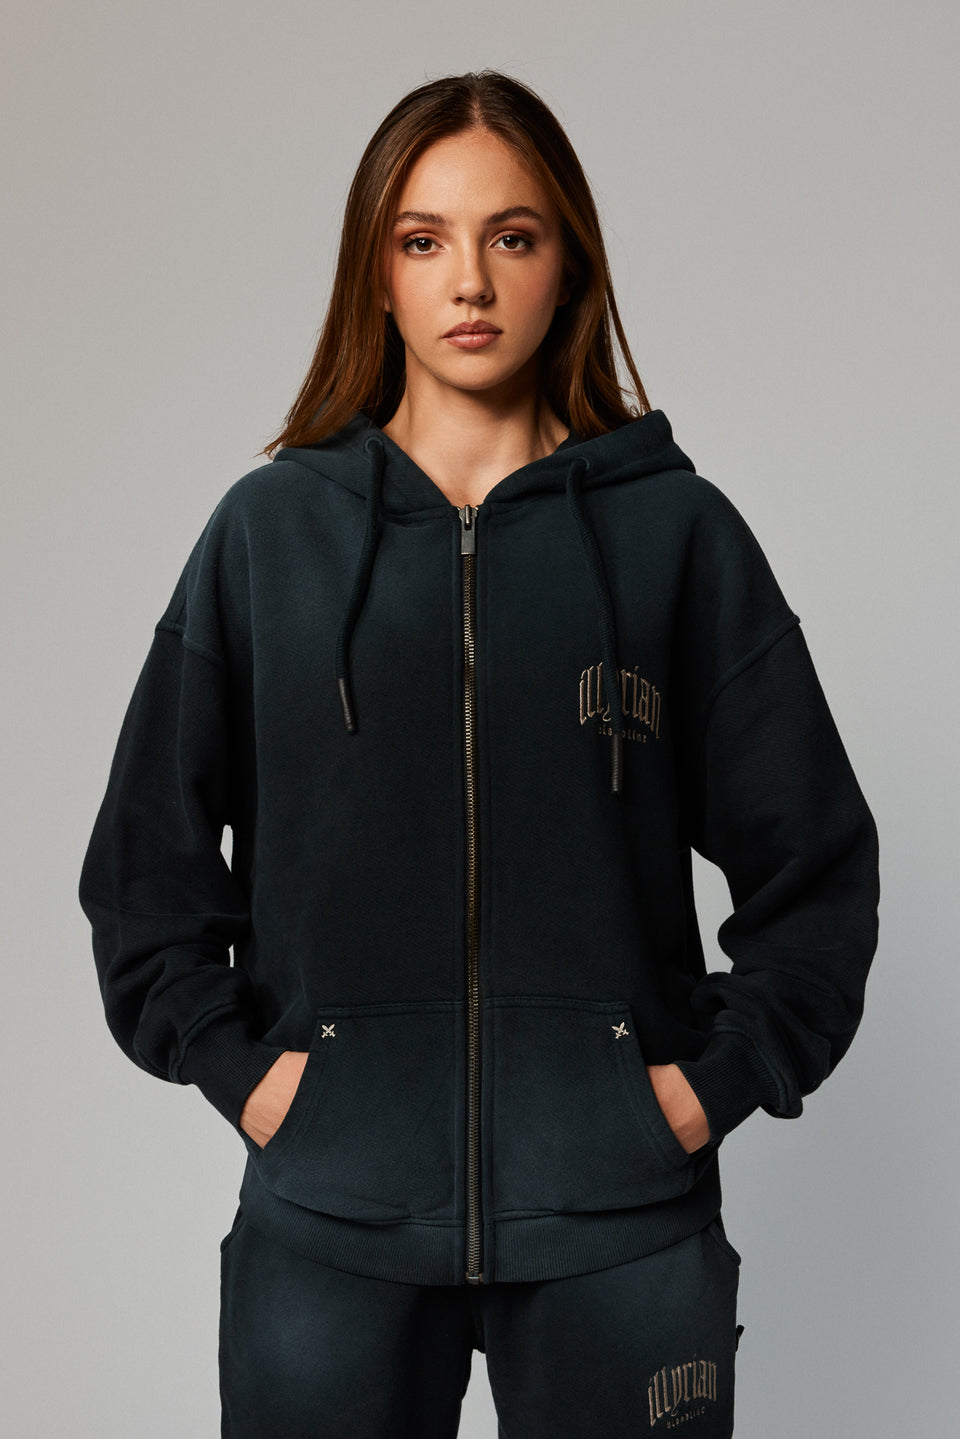 Illyrian Washed Zipped Hoodie